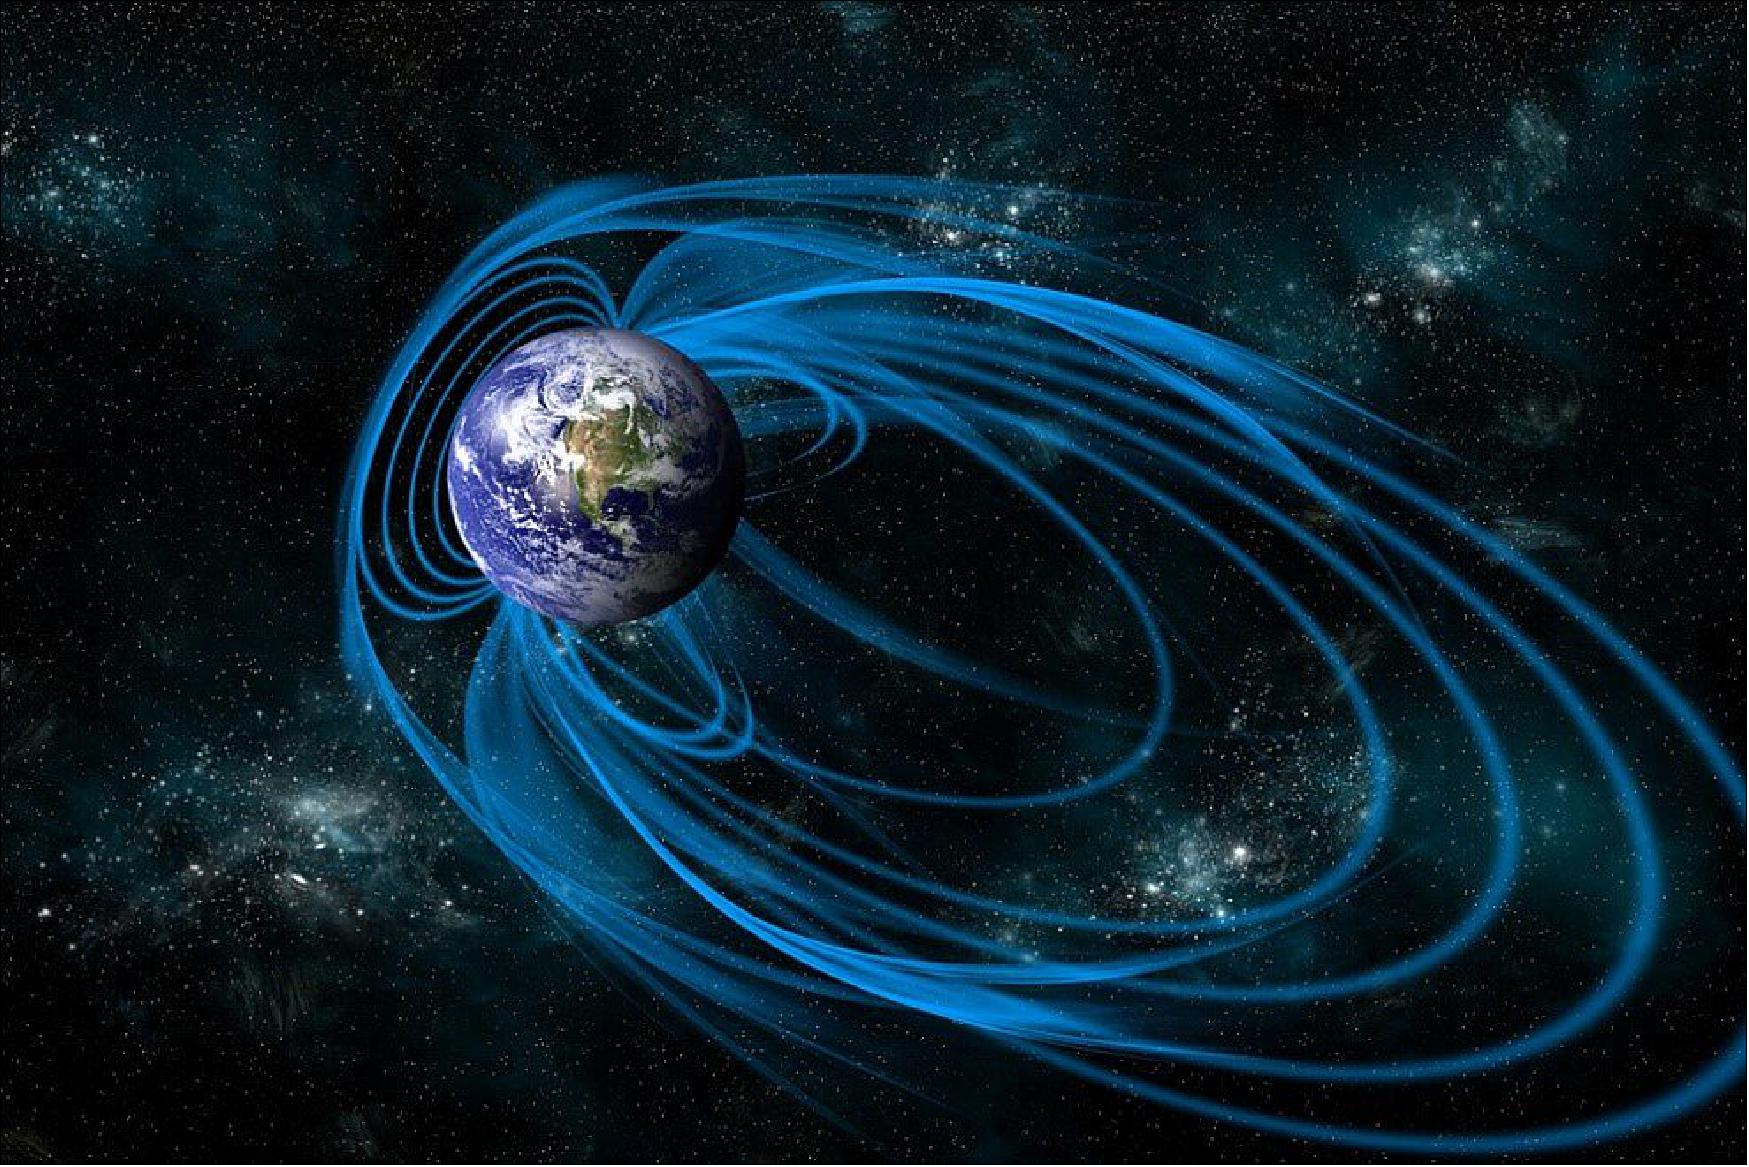 Figure 11: Satellites pass through the Van Allen belts multiple times during solar electric orbit raising so are exposed to a higher dose of high-energy particles than during conventional chemical orbit raising (image credit: Marc Ward/Shutterstock)